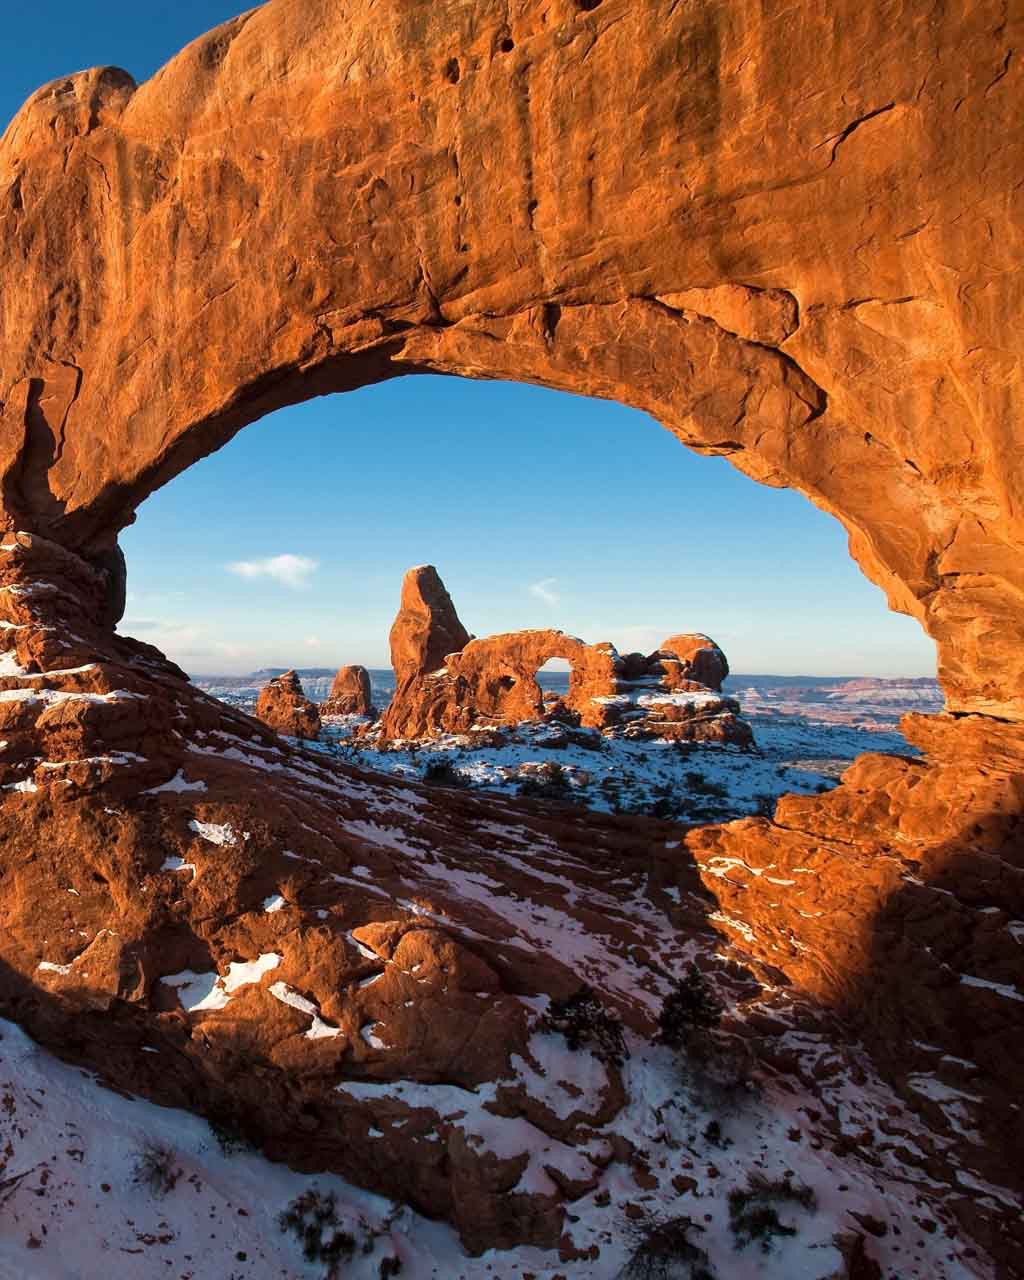 Snow Winter in Arches National Park, Utah